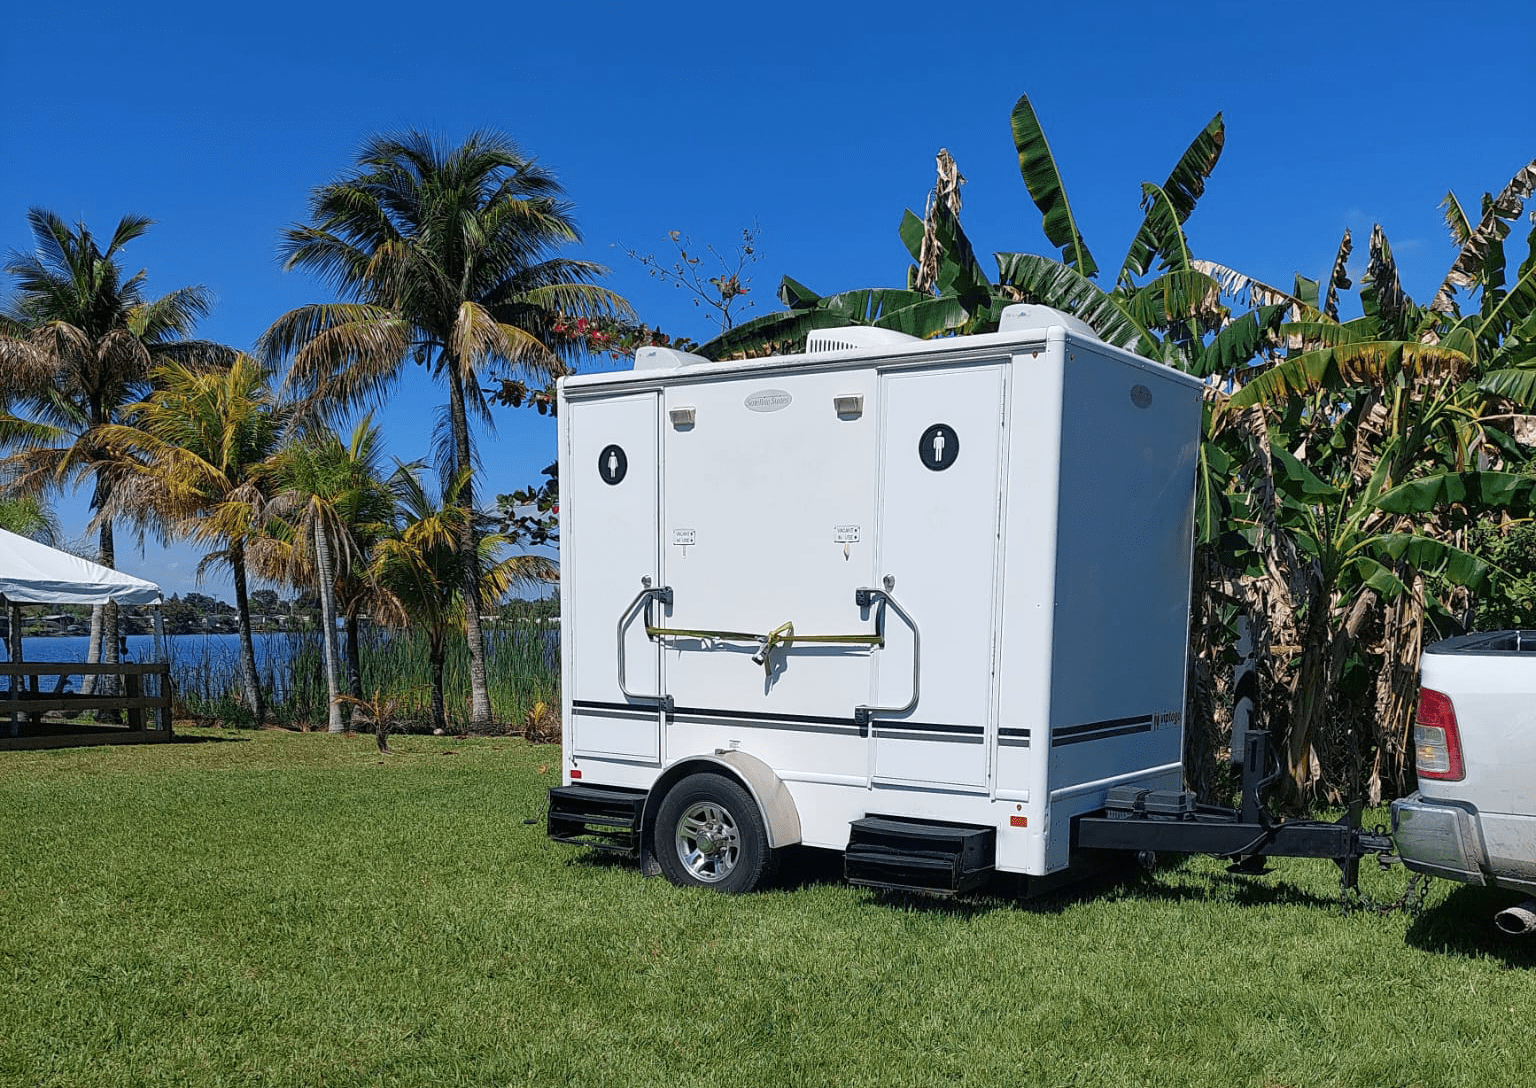 VIP To Go’s standard porta potty trailer at an outdoor event